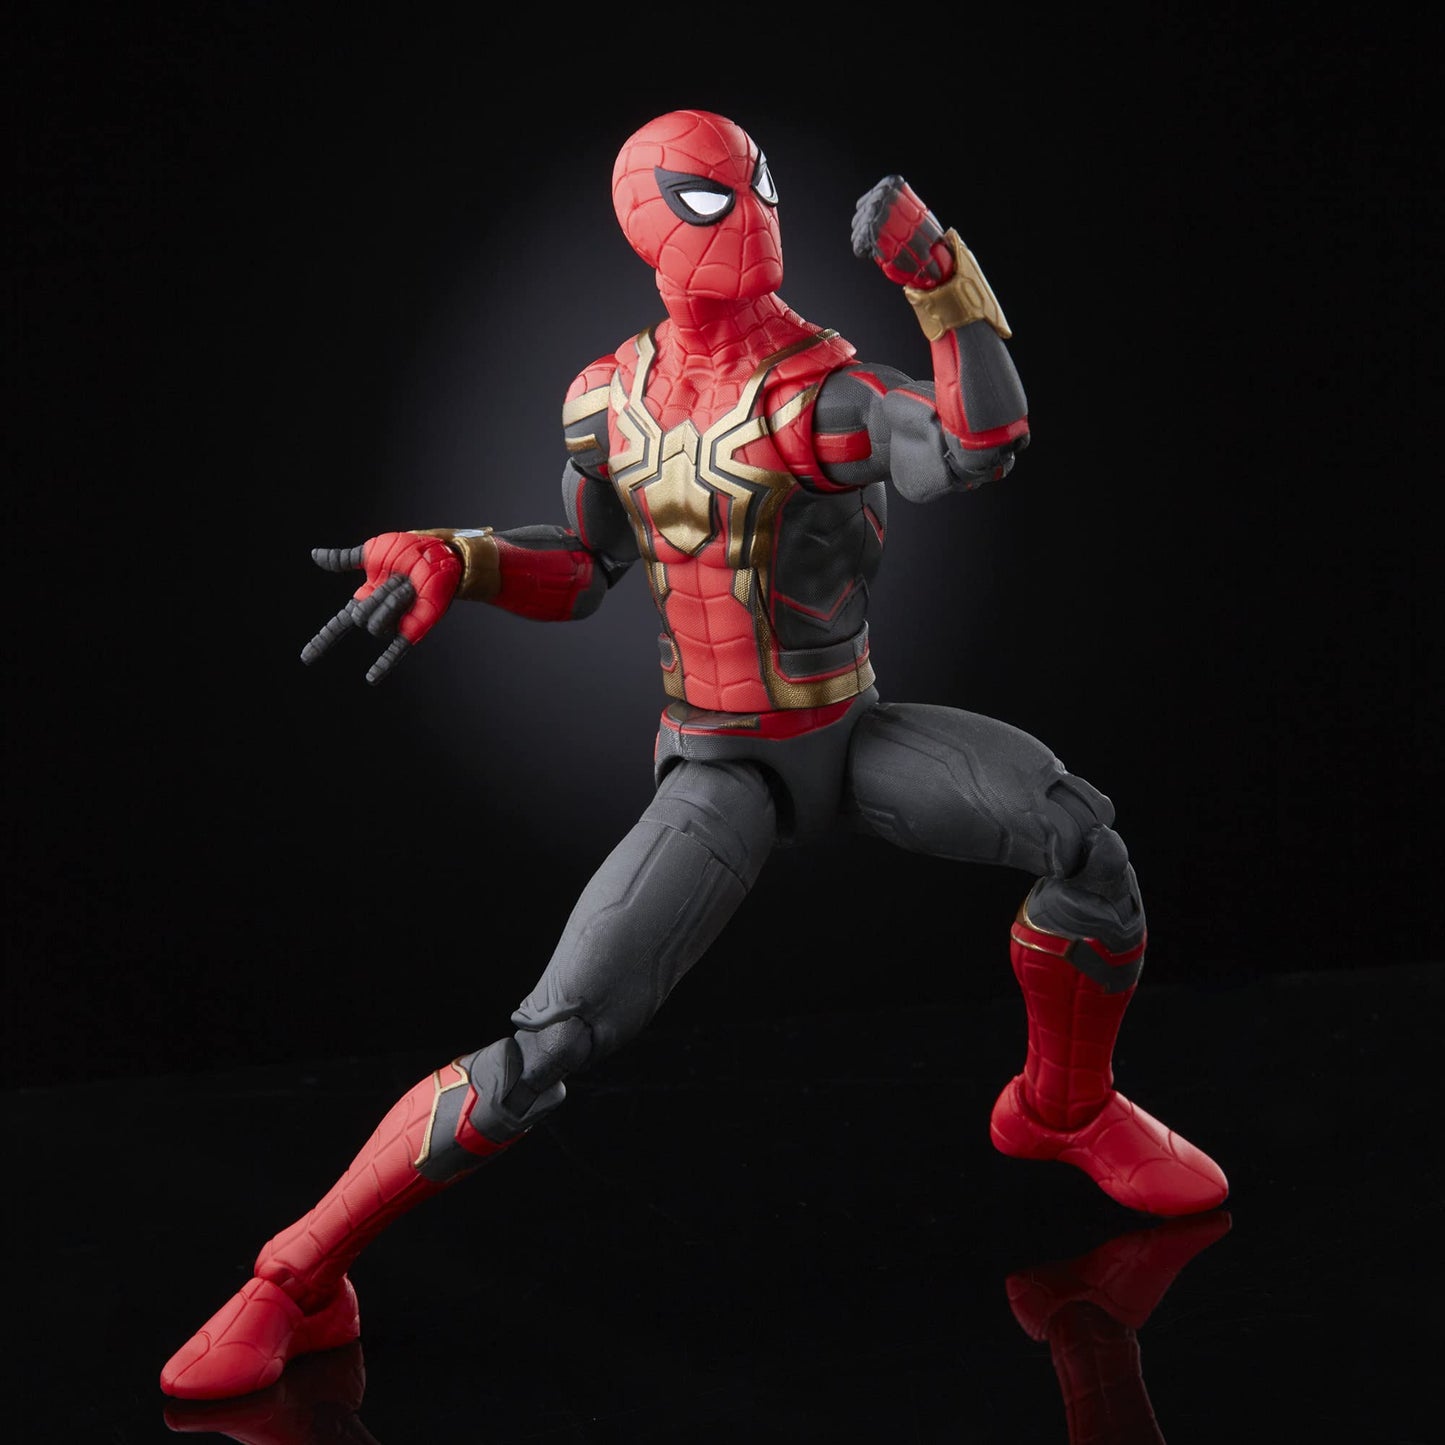 Spider-Man Marvel Legends Series Integrated Suit 6-inch Collectible Action Figure Toy, 2 Accessories